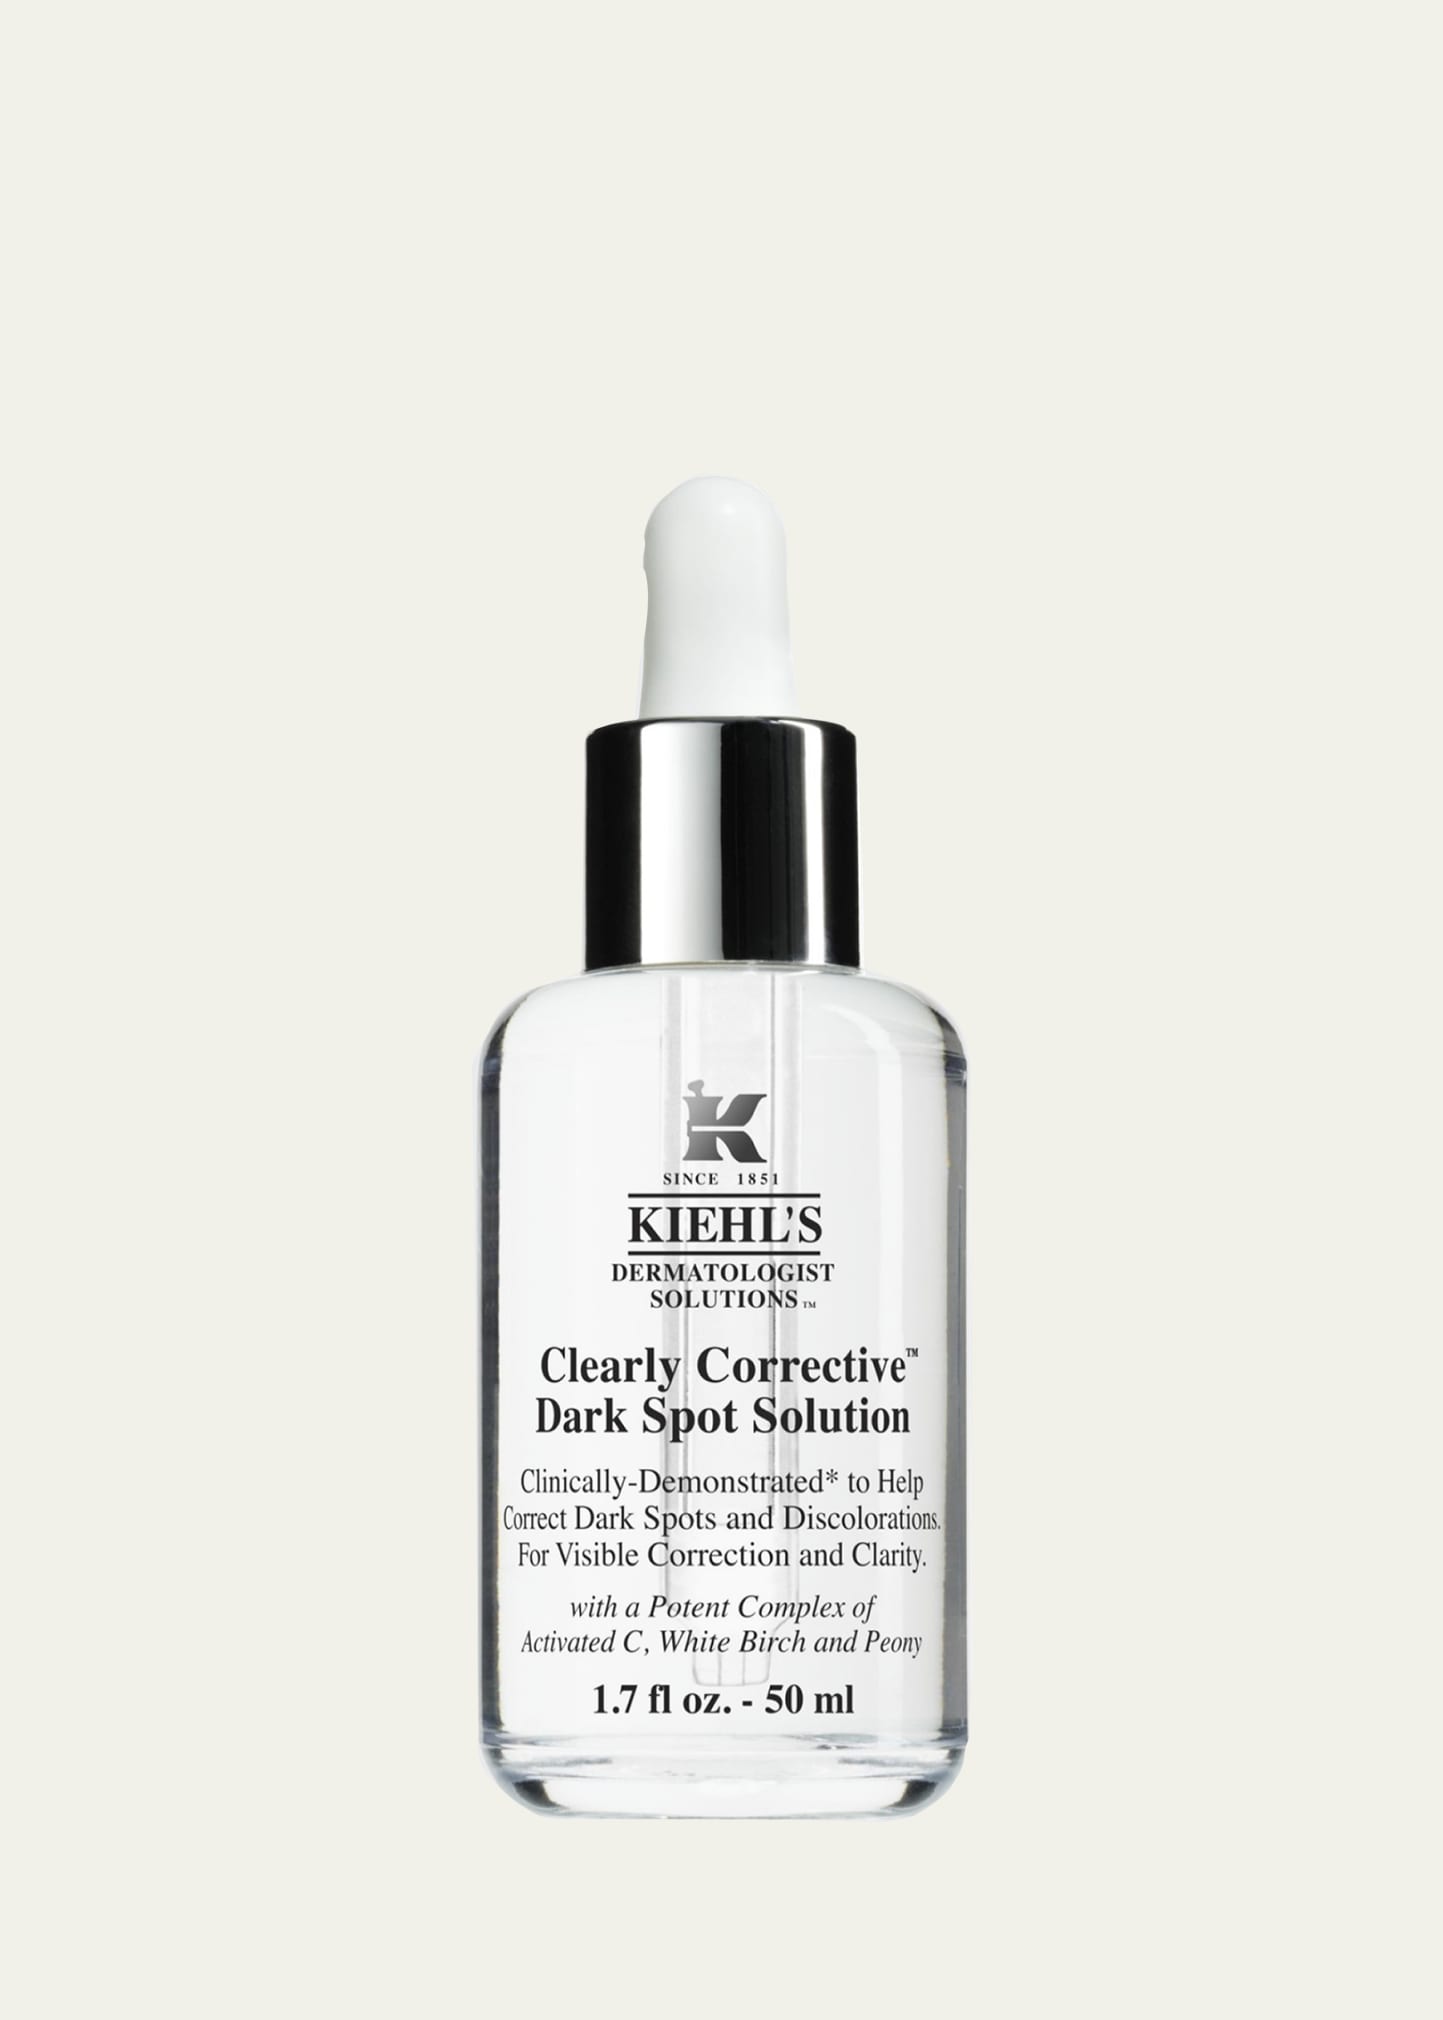 Clearly Corrective Dark Spot Solution, 1.7 oz.